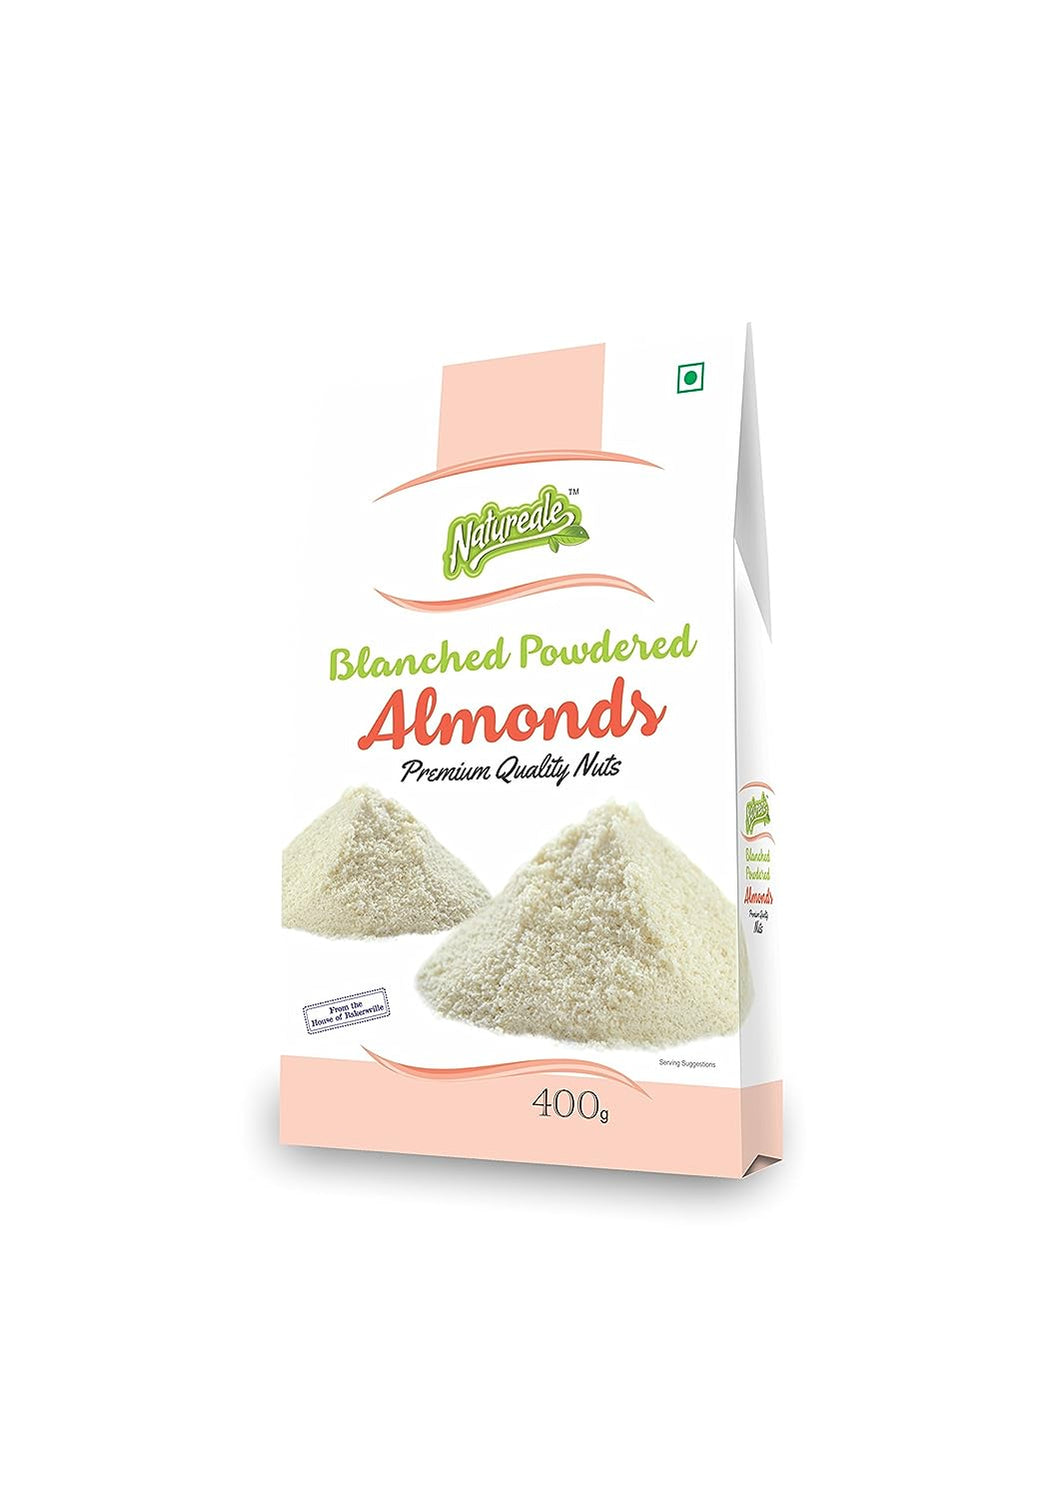 Natureale Blanched Powdered Almond, 400 Gm